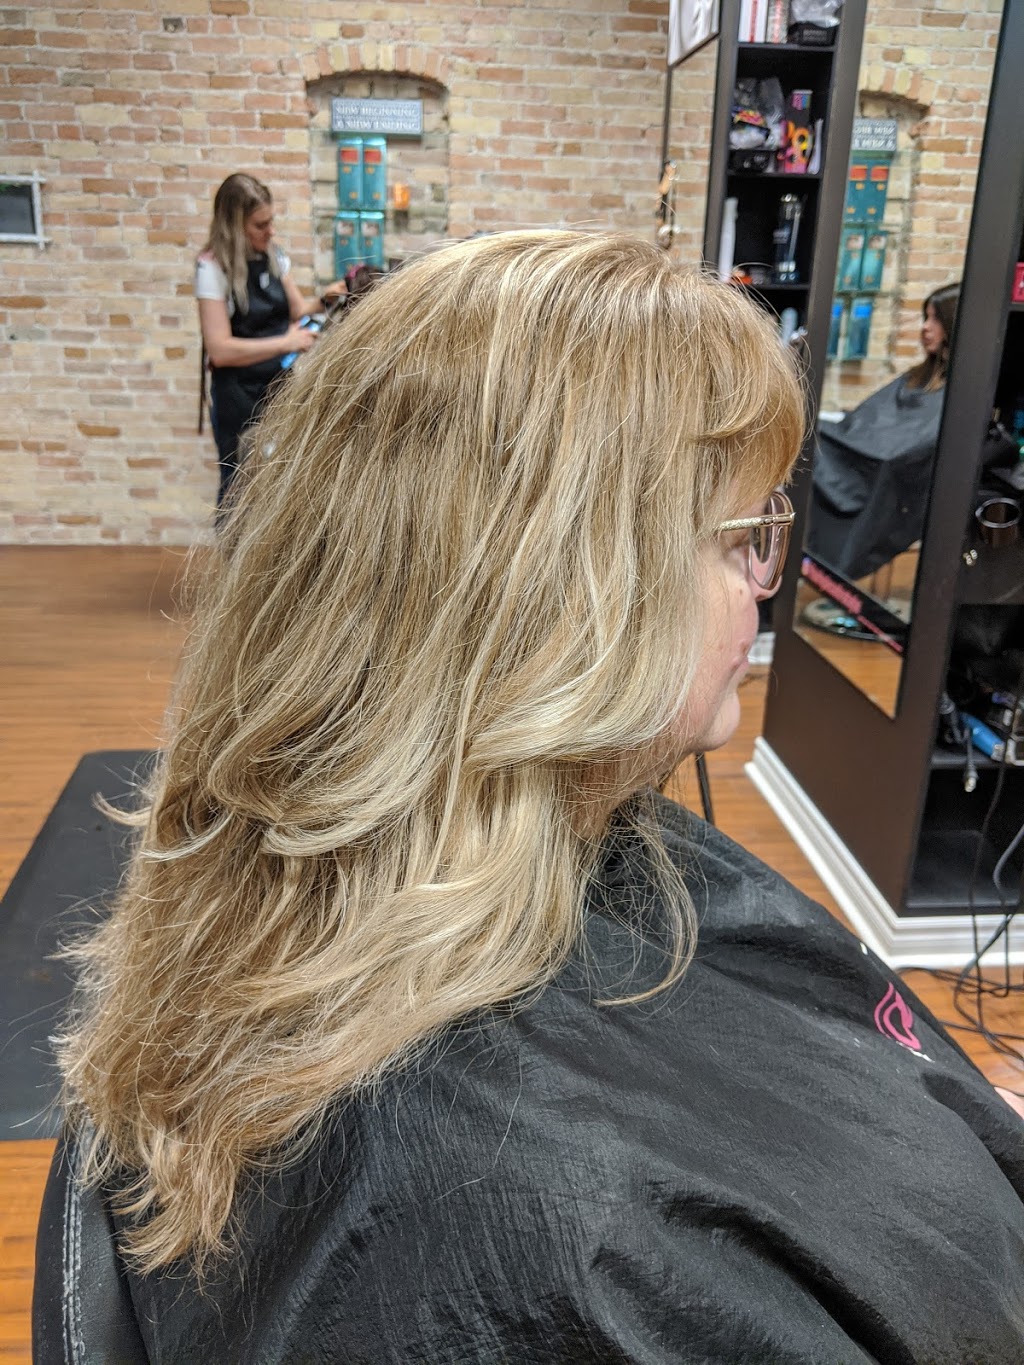 Studio M Hair Salon & Spa | 122 Courthouse Square, Goderich, ON N7A 1M8, Canada | Phone: (519) 440-0400